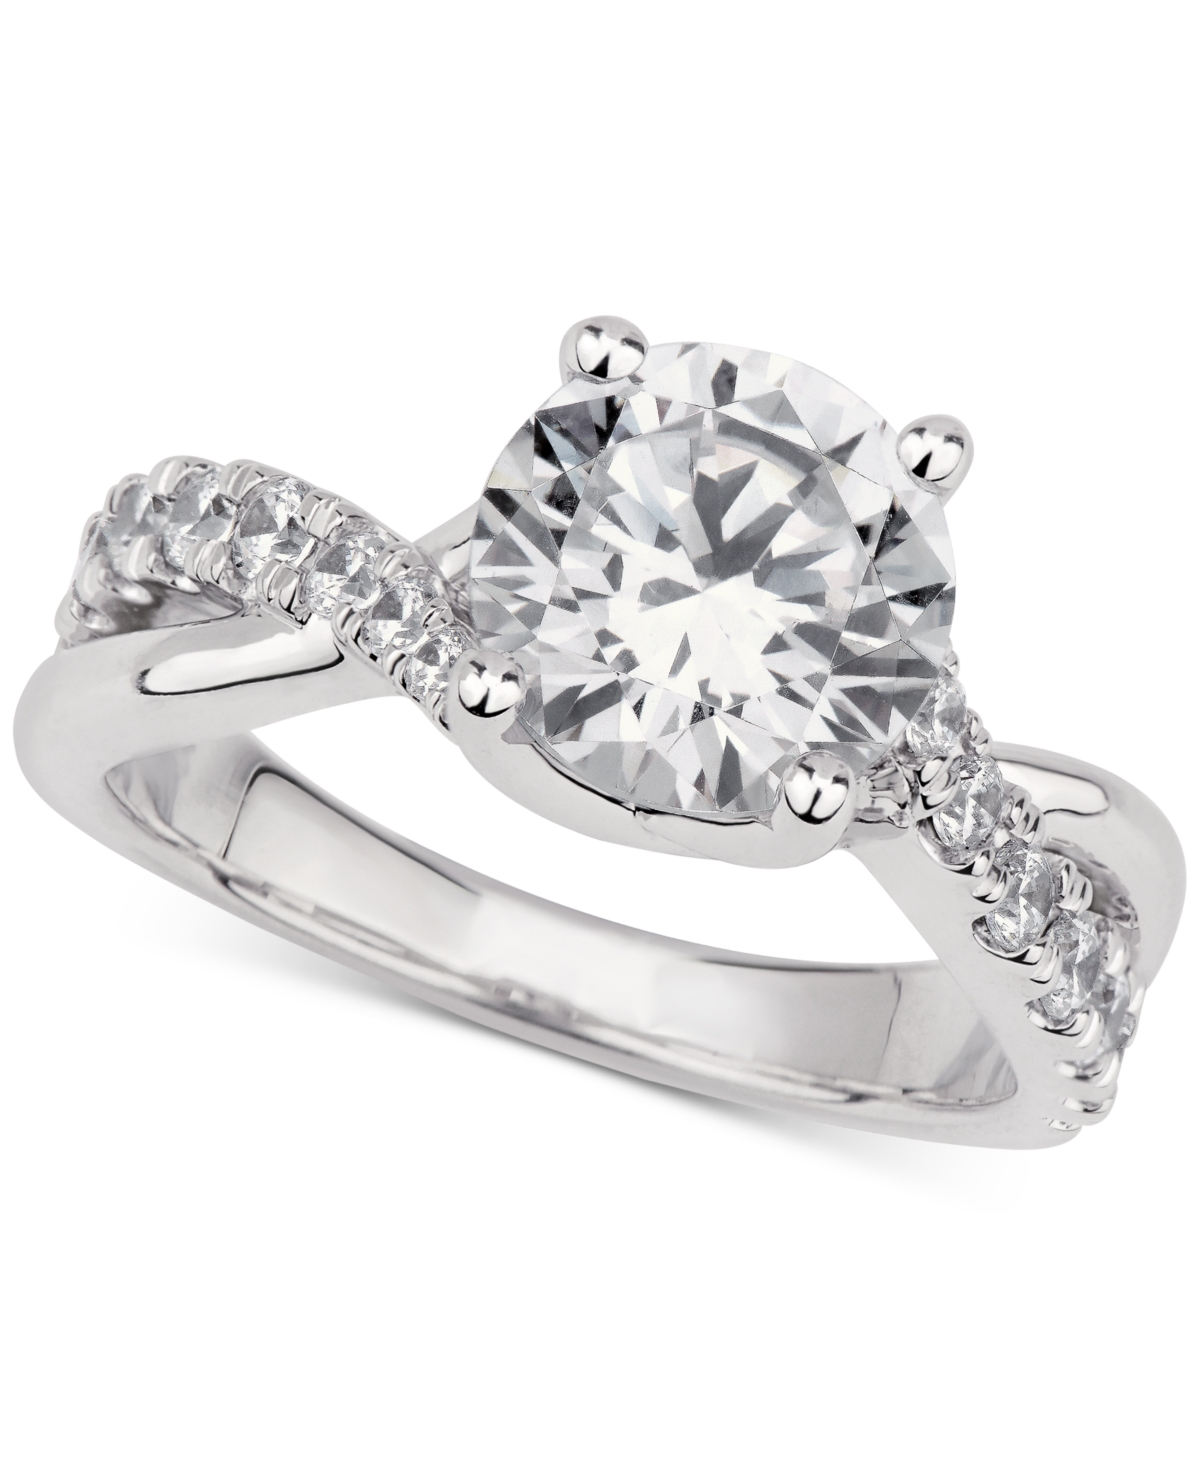 Gia Certified Diamond Twist Shank Engagement Ring (2-1/2 ct. t.w.) in 14k White Gold - White Gold